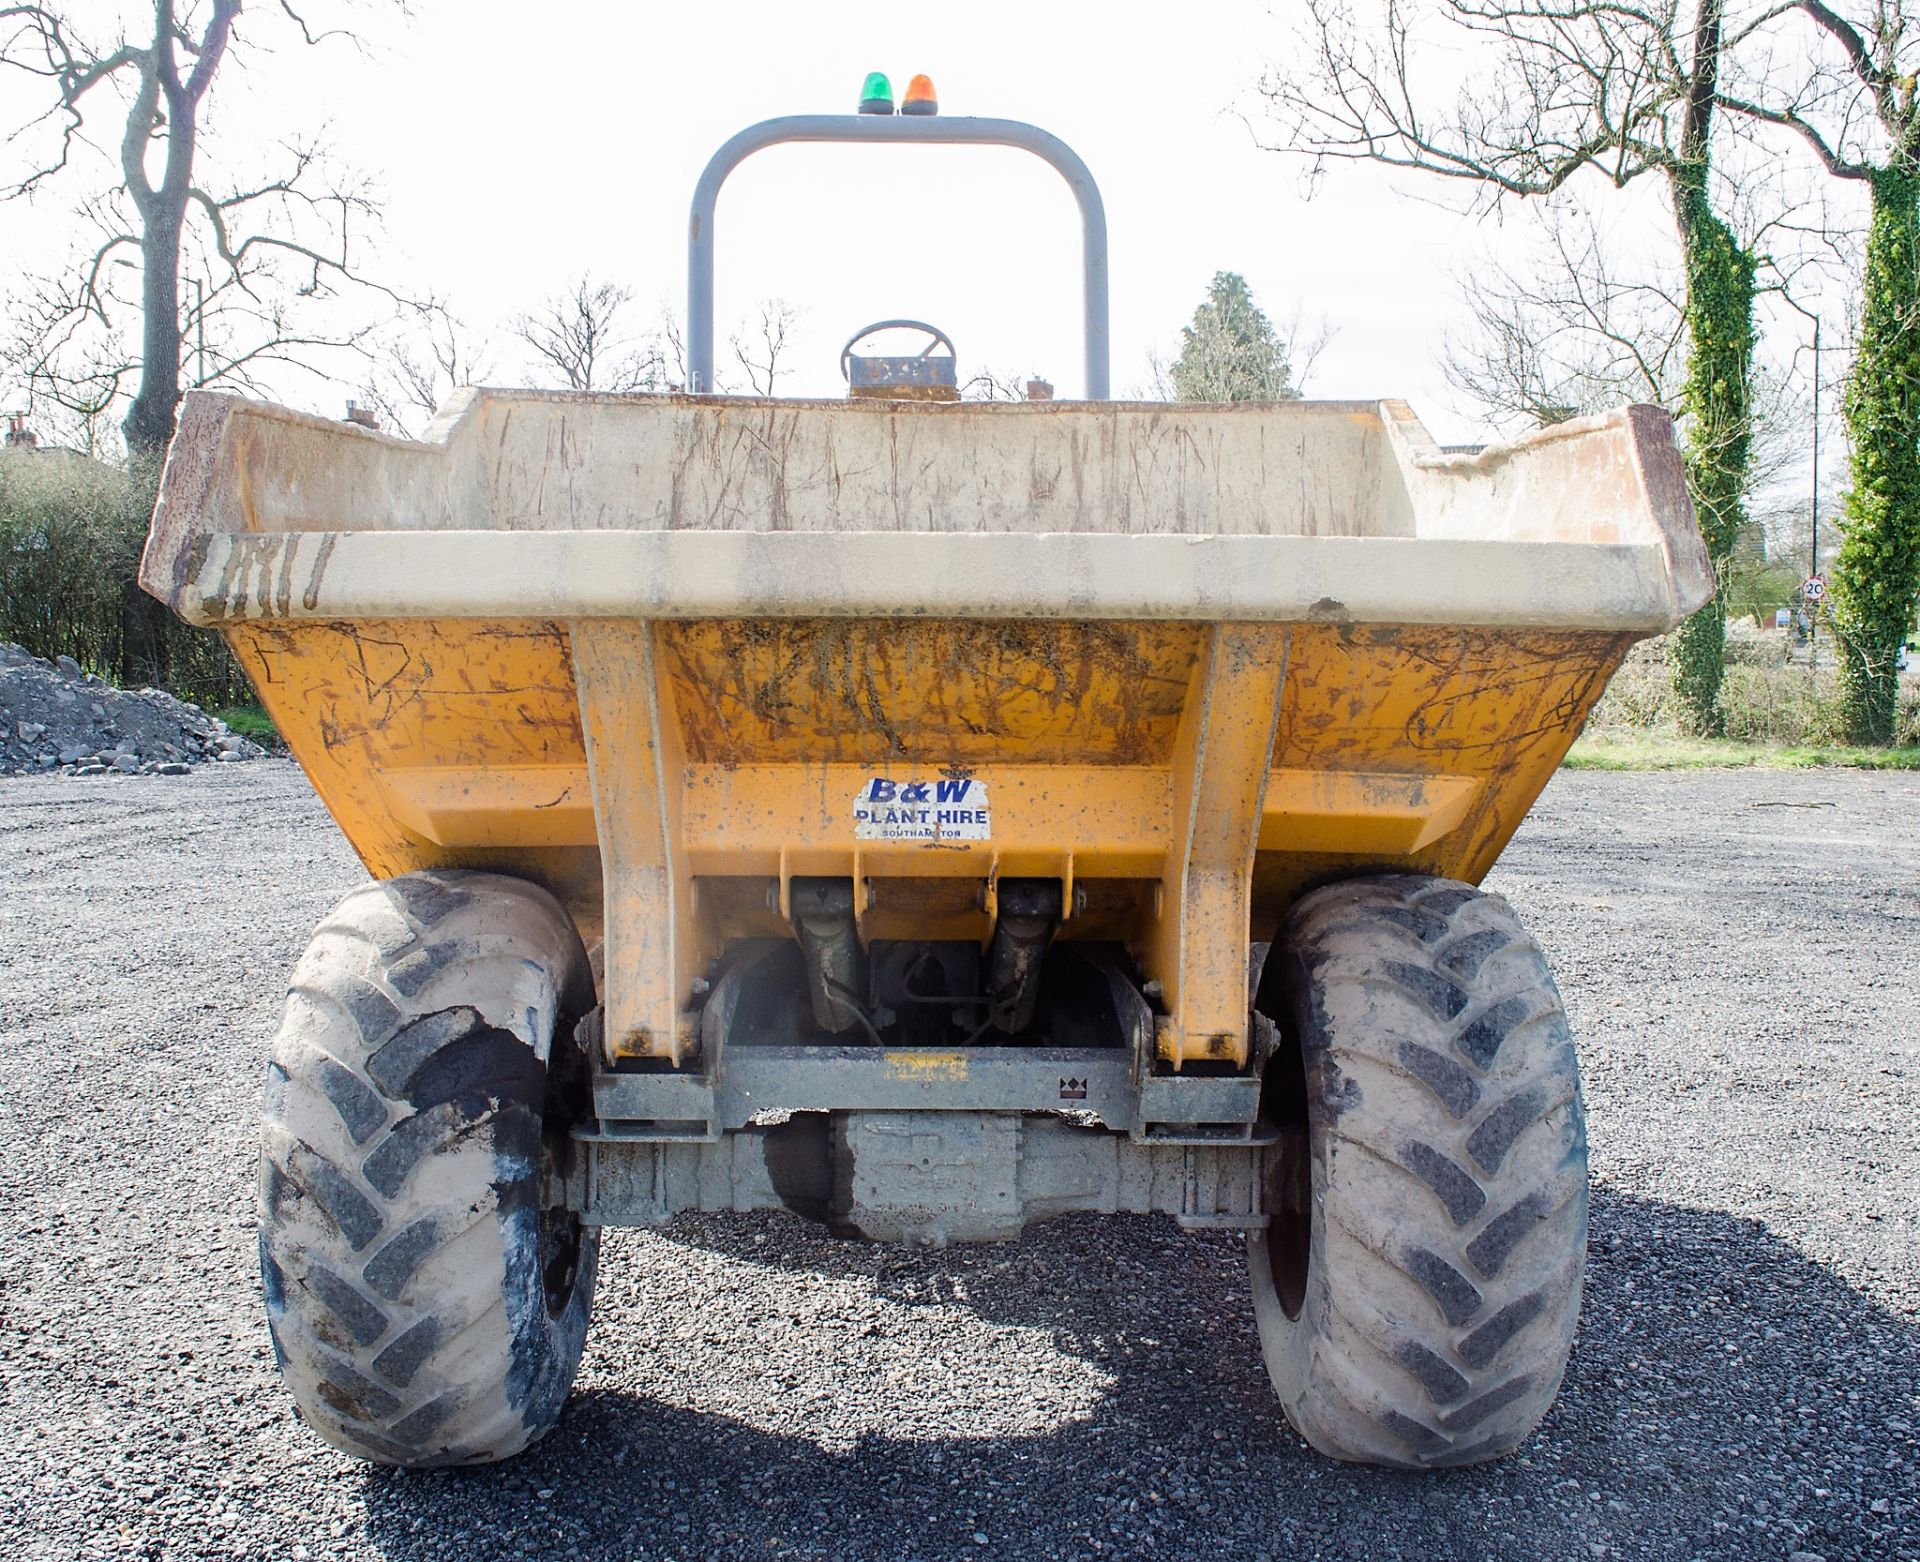 Terex 9 tonne straight skip dumper Year: 2011 S/N: BBMV2940 Recorded Hours: Not displayed D1465 - Image 5 of 21